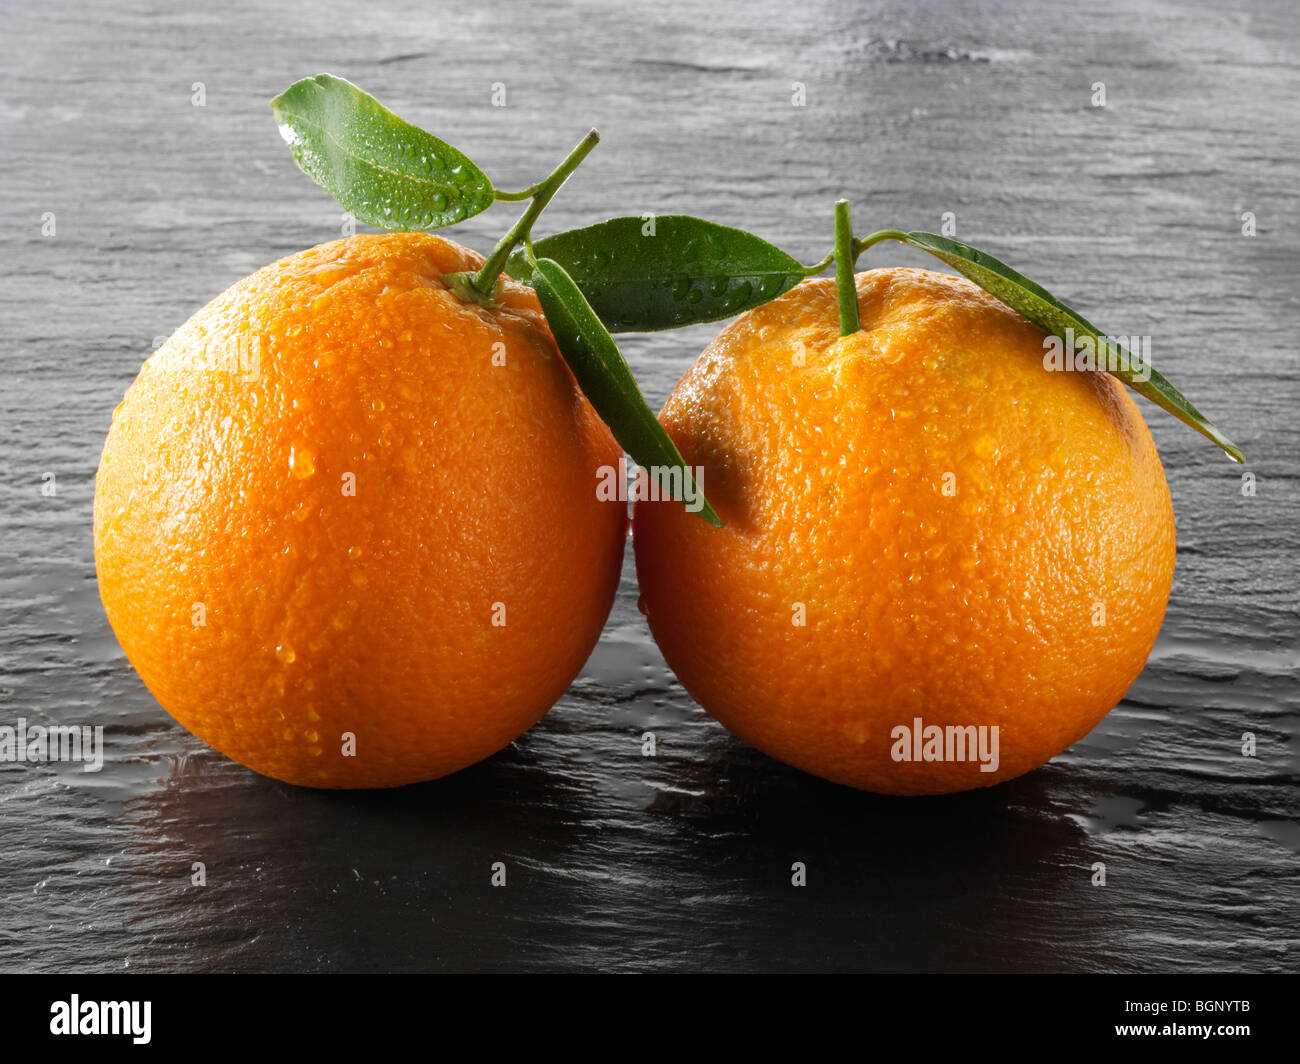 Whole and cut fresh oranges with leaves against a black background Stock Photo